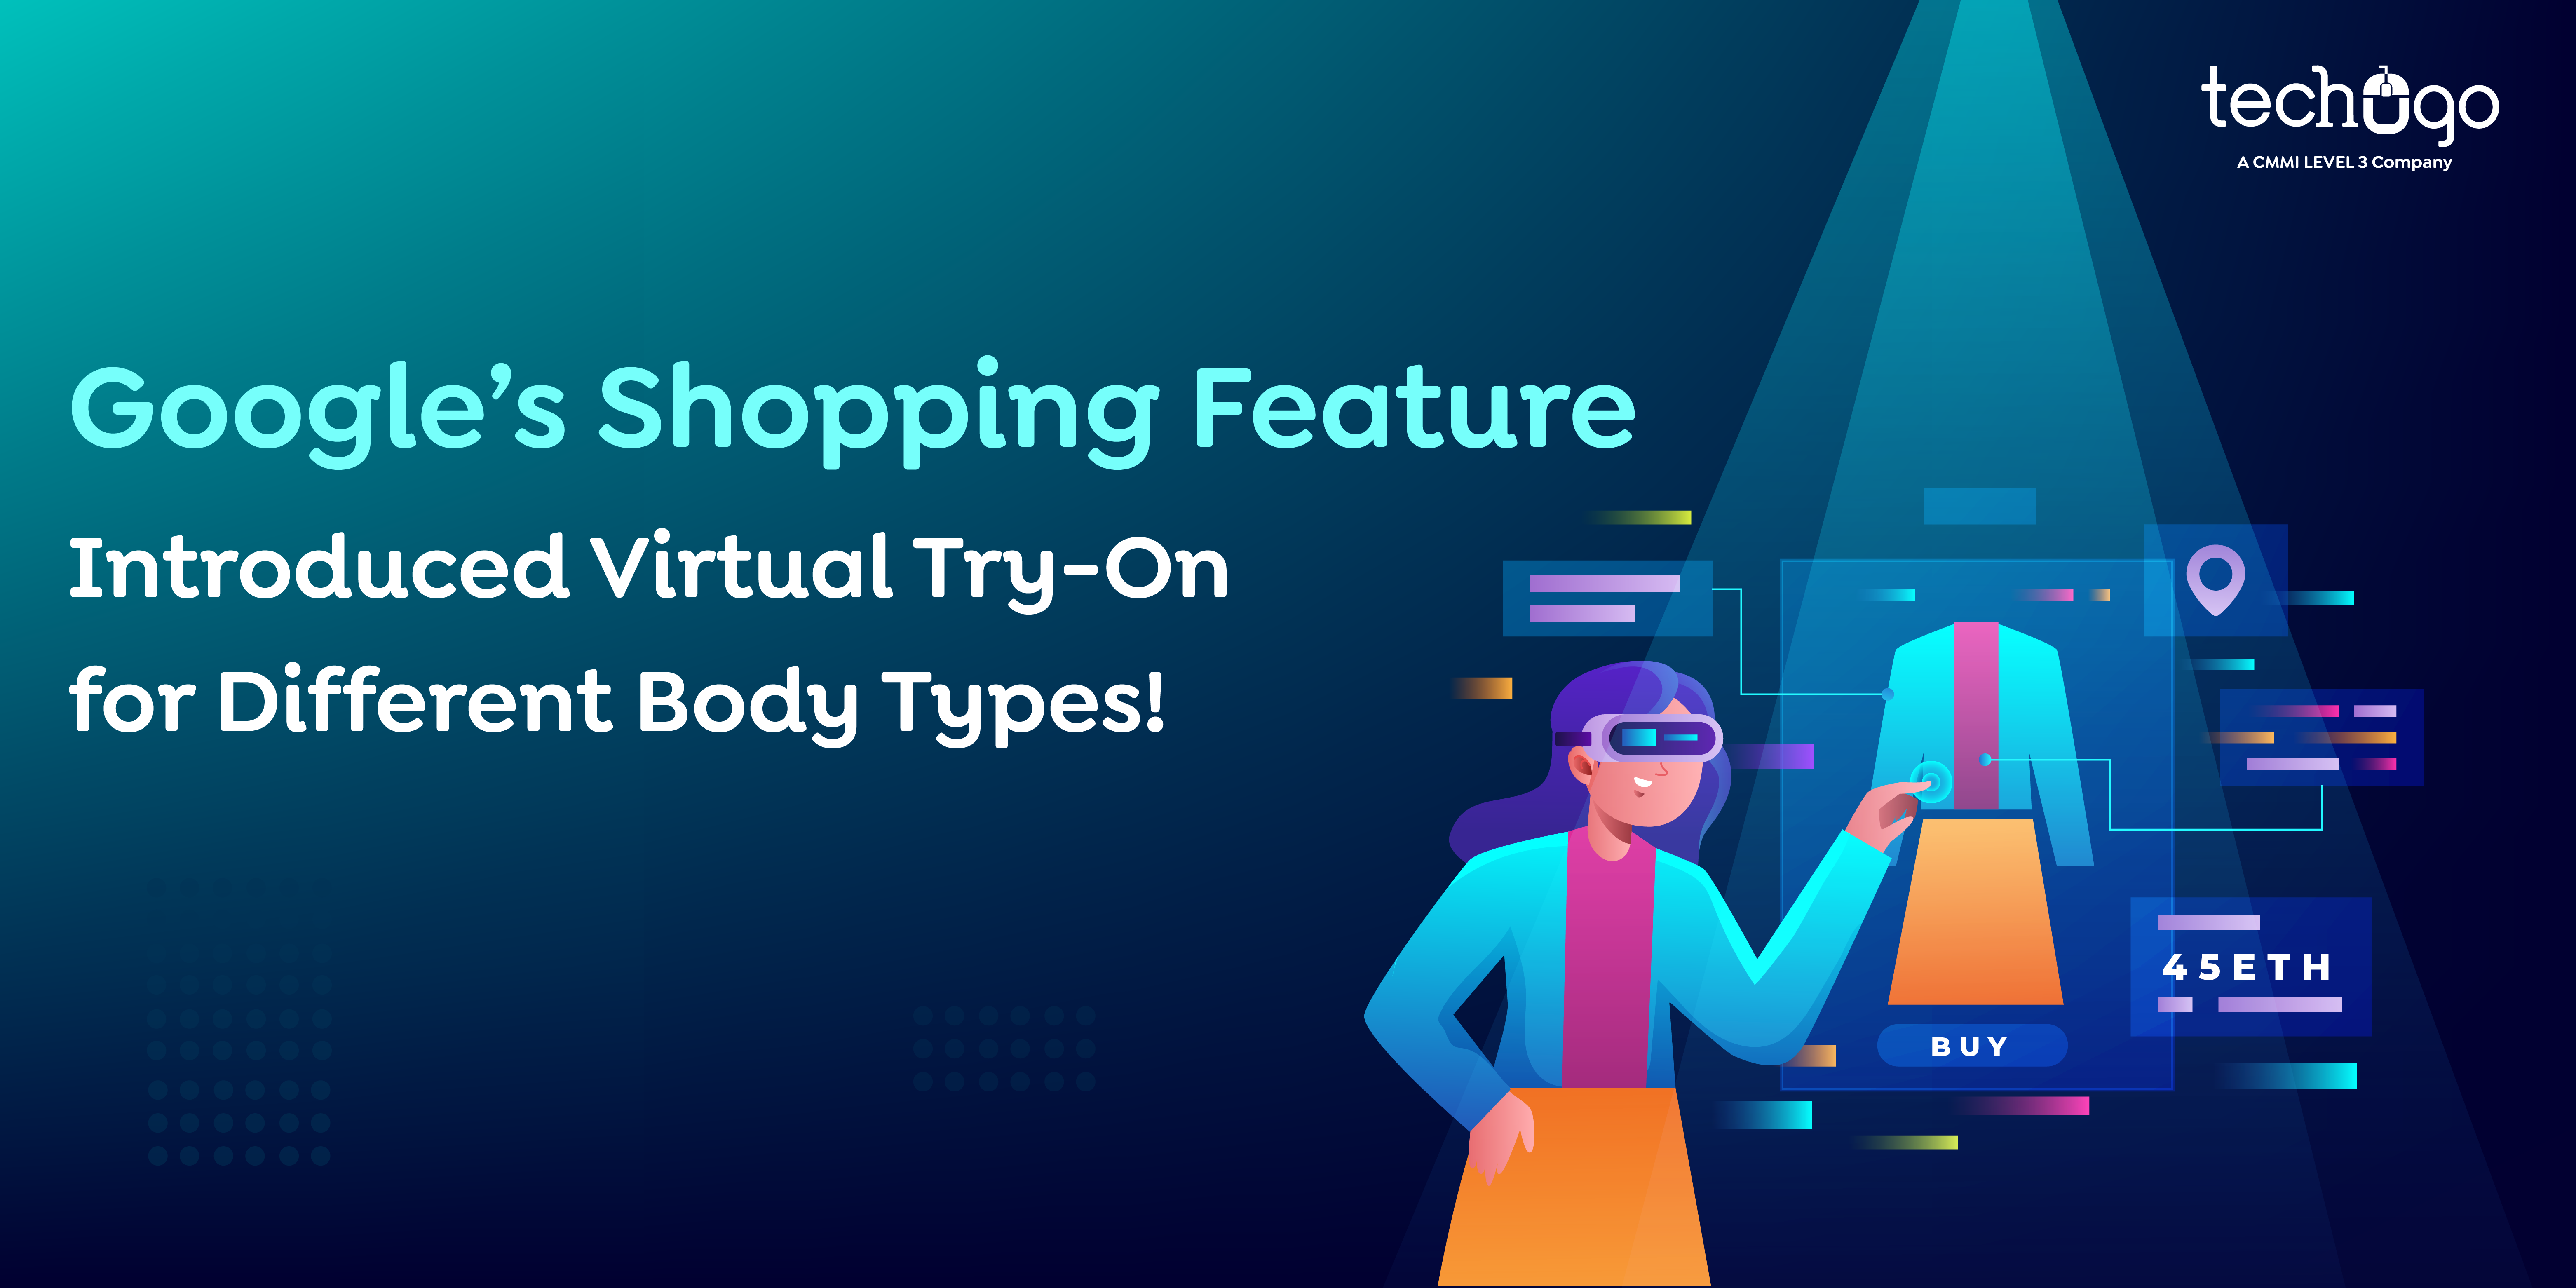 Google’s Shopping Feature